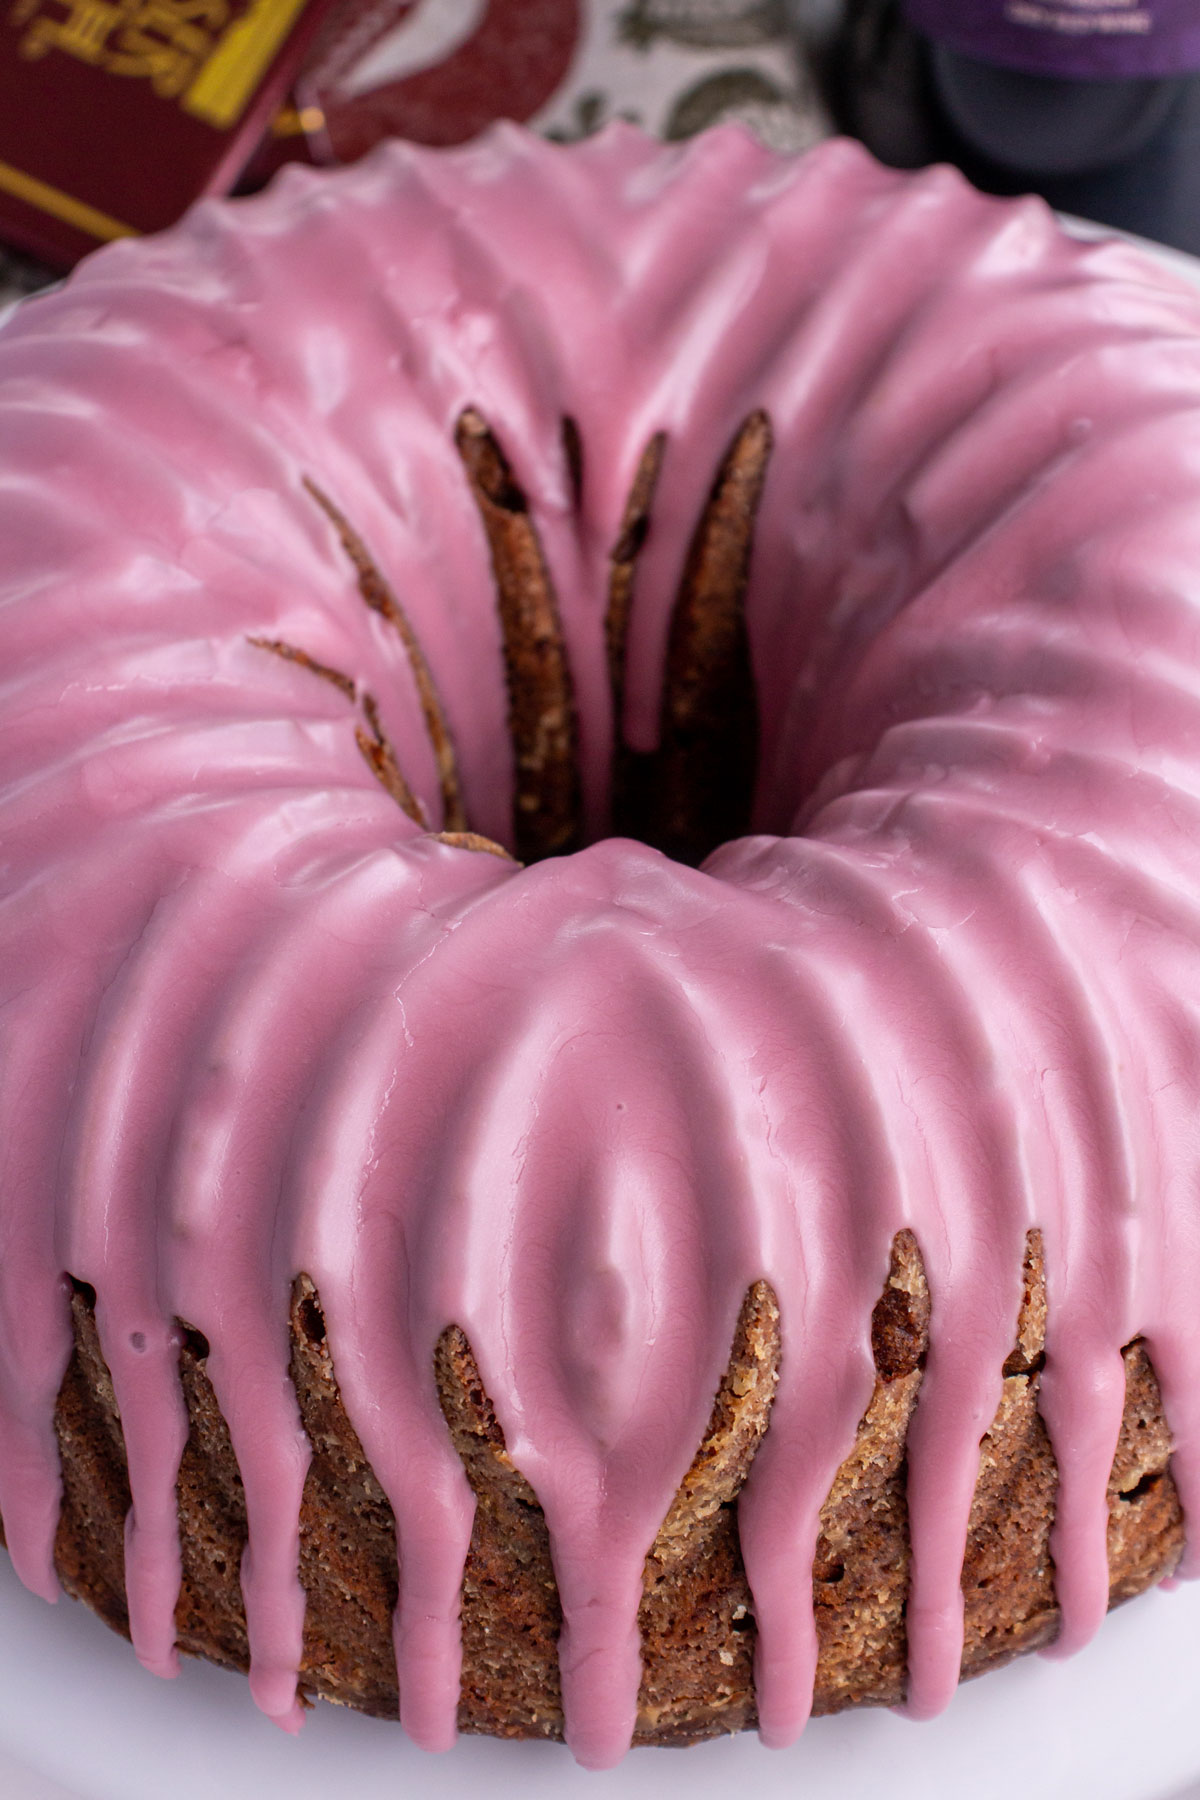 Closeup of a Bundt cake with pink glaze dripping down the sides.